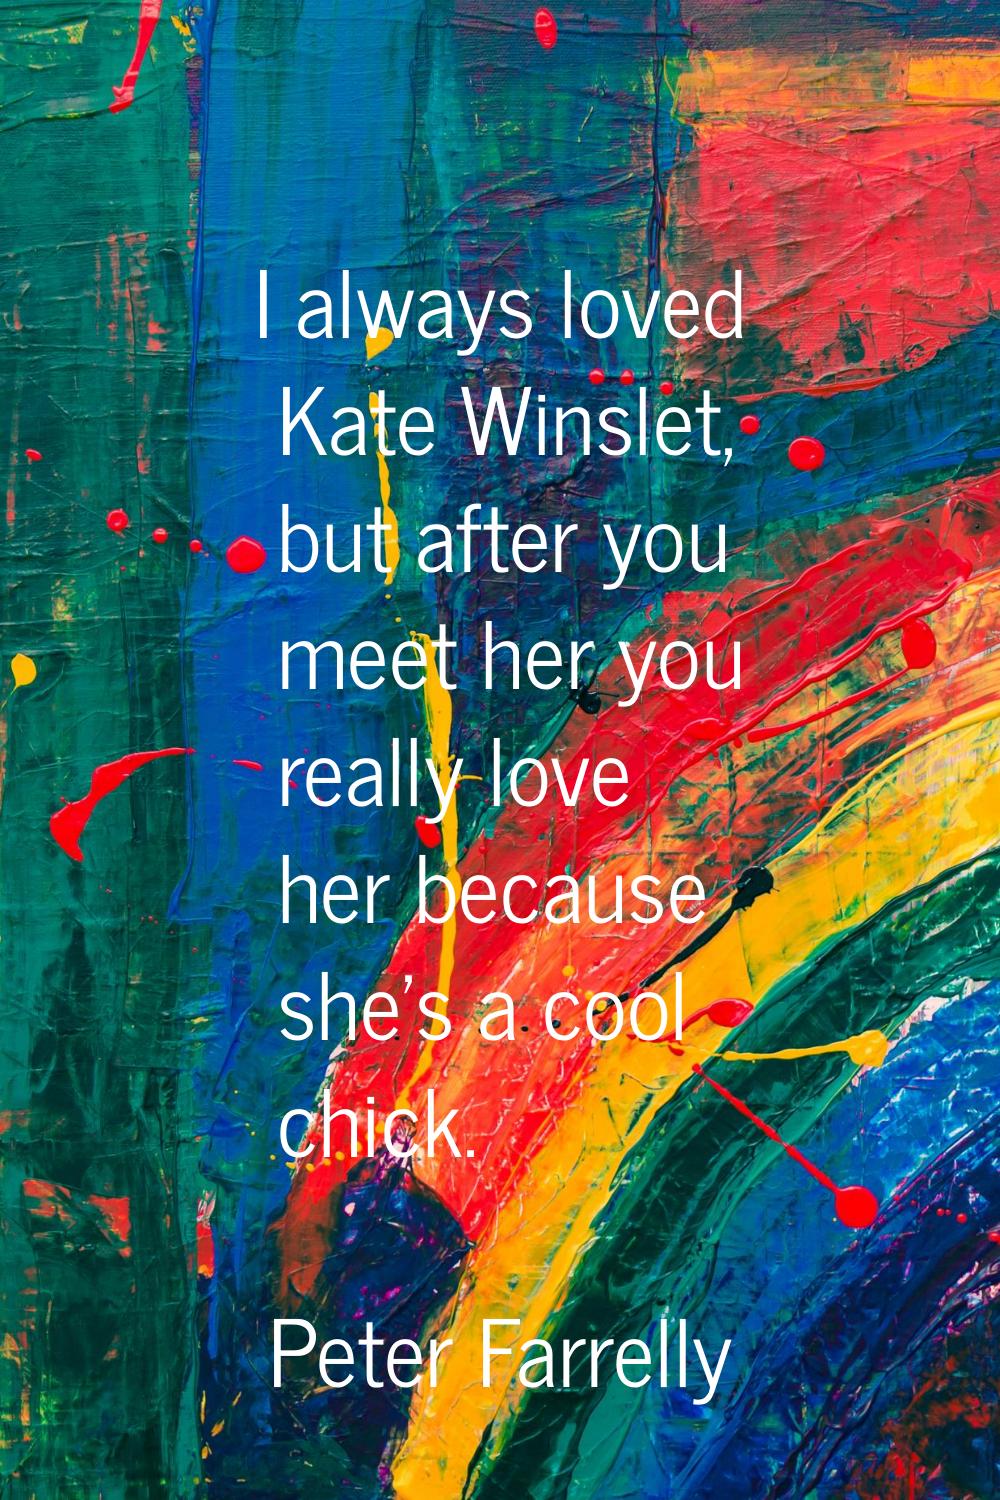 I always loved Kate Winslet, but after you meet her you really love her because she's a cool chick.